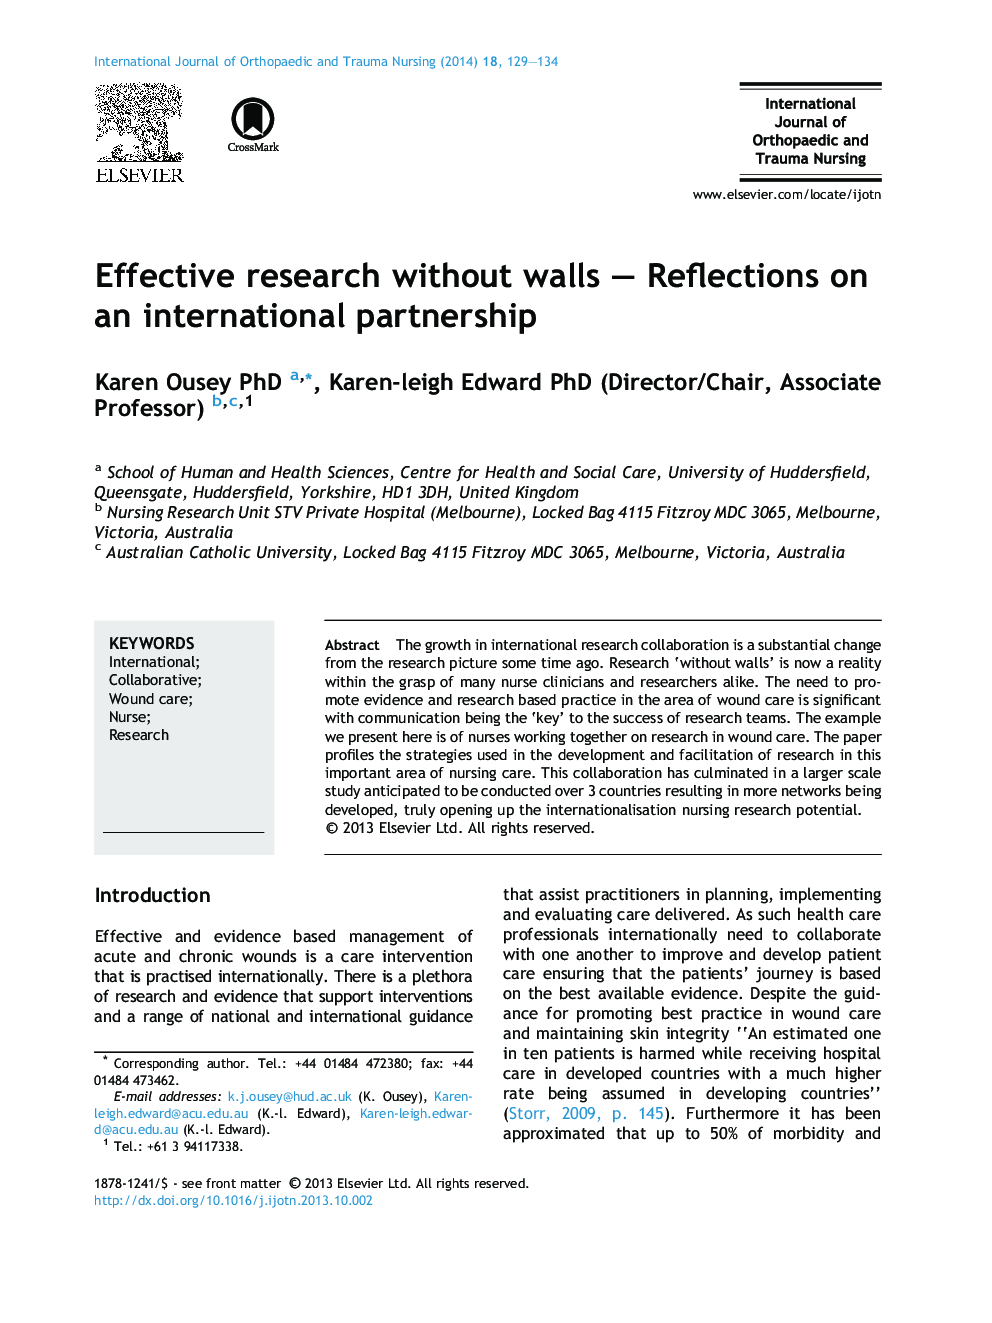 Effective research without walls – Reflections on an international partnership